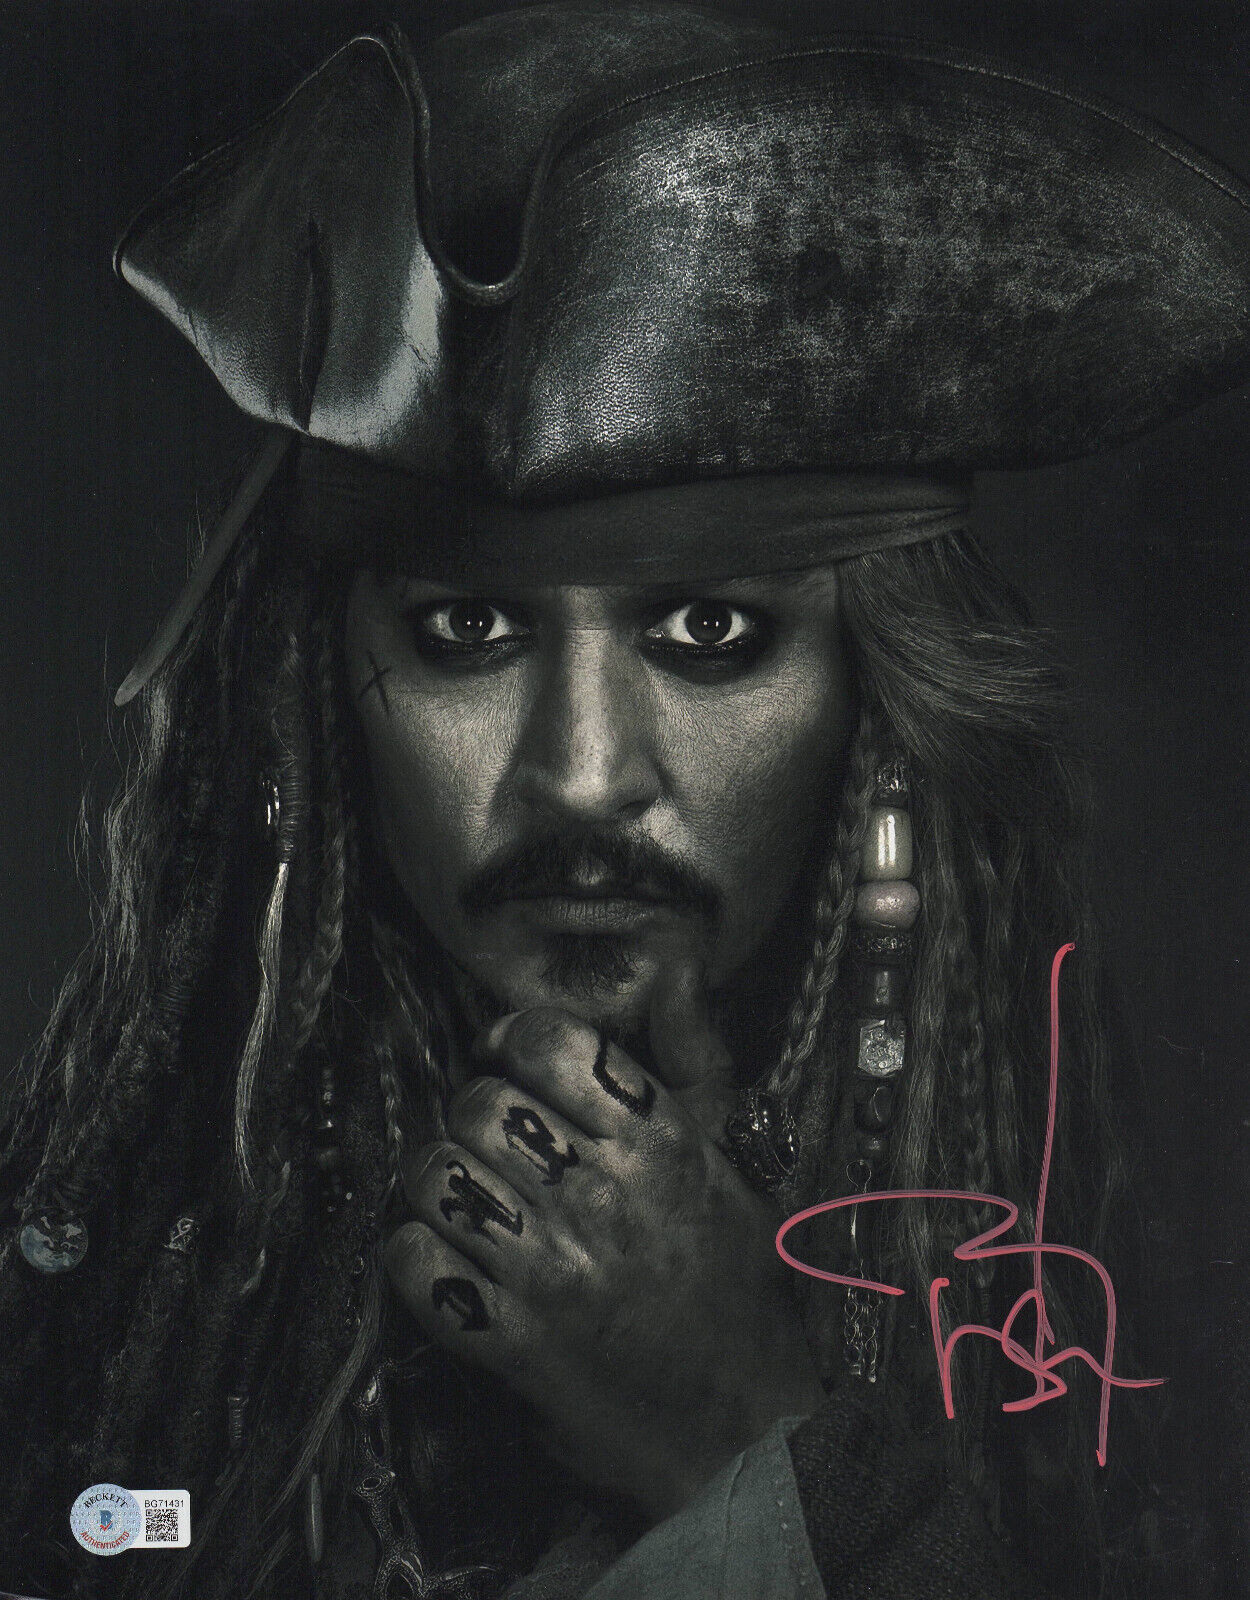 JOHNNY DEPP SIGNED 'PIRATES OF THE CARIBBEAN' 11X14 PHOTO AUTOGRAPH BECKETT